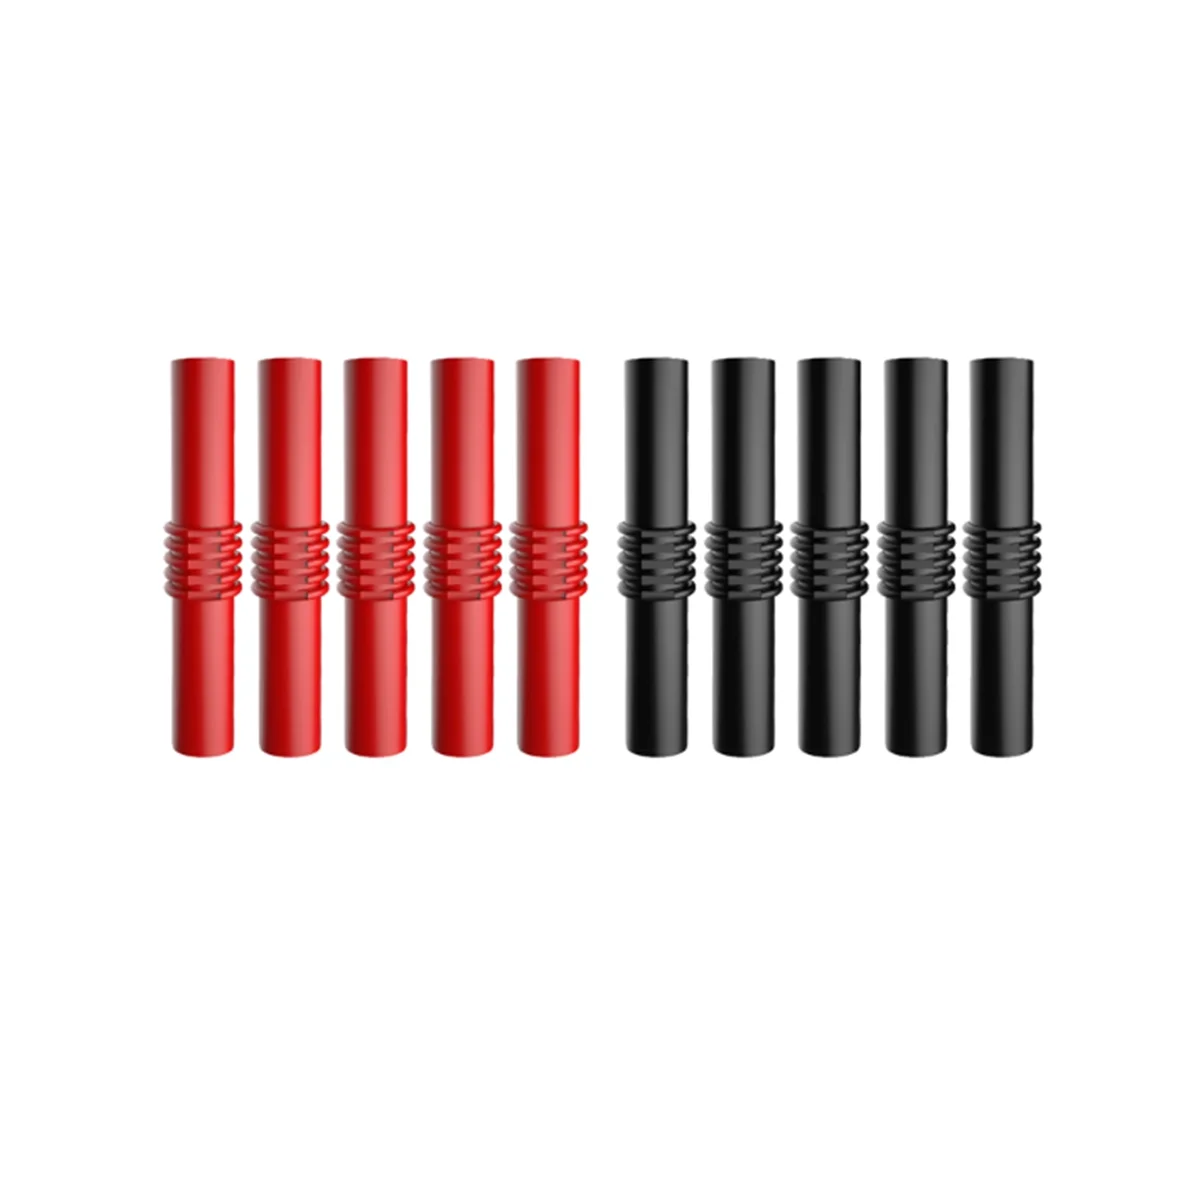 

P7023 10Pcs/Lot Extension Insulated PVC 4mm Banana Plug Socket Female to Female Adapter Coupler Connector Red Black